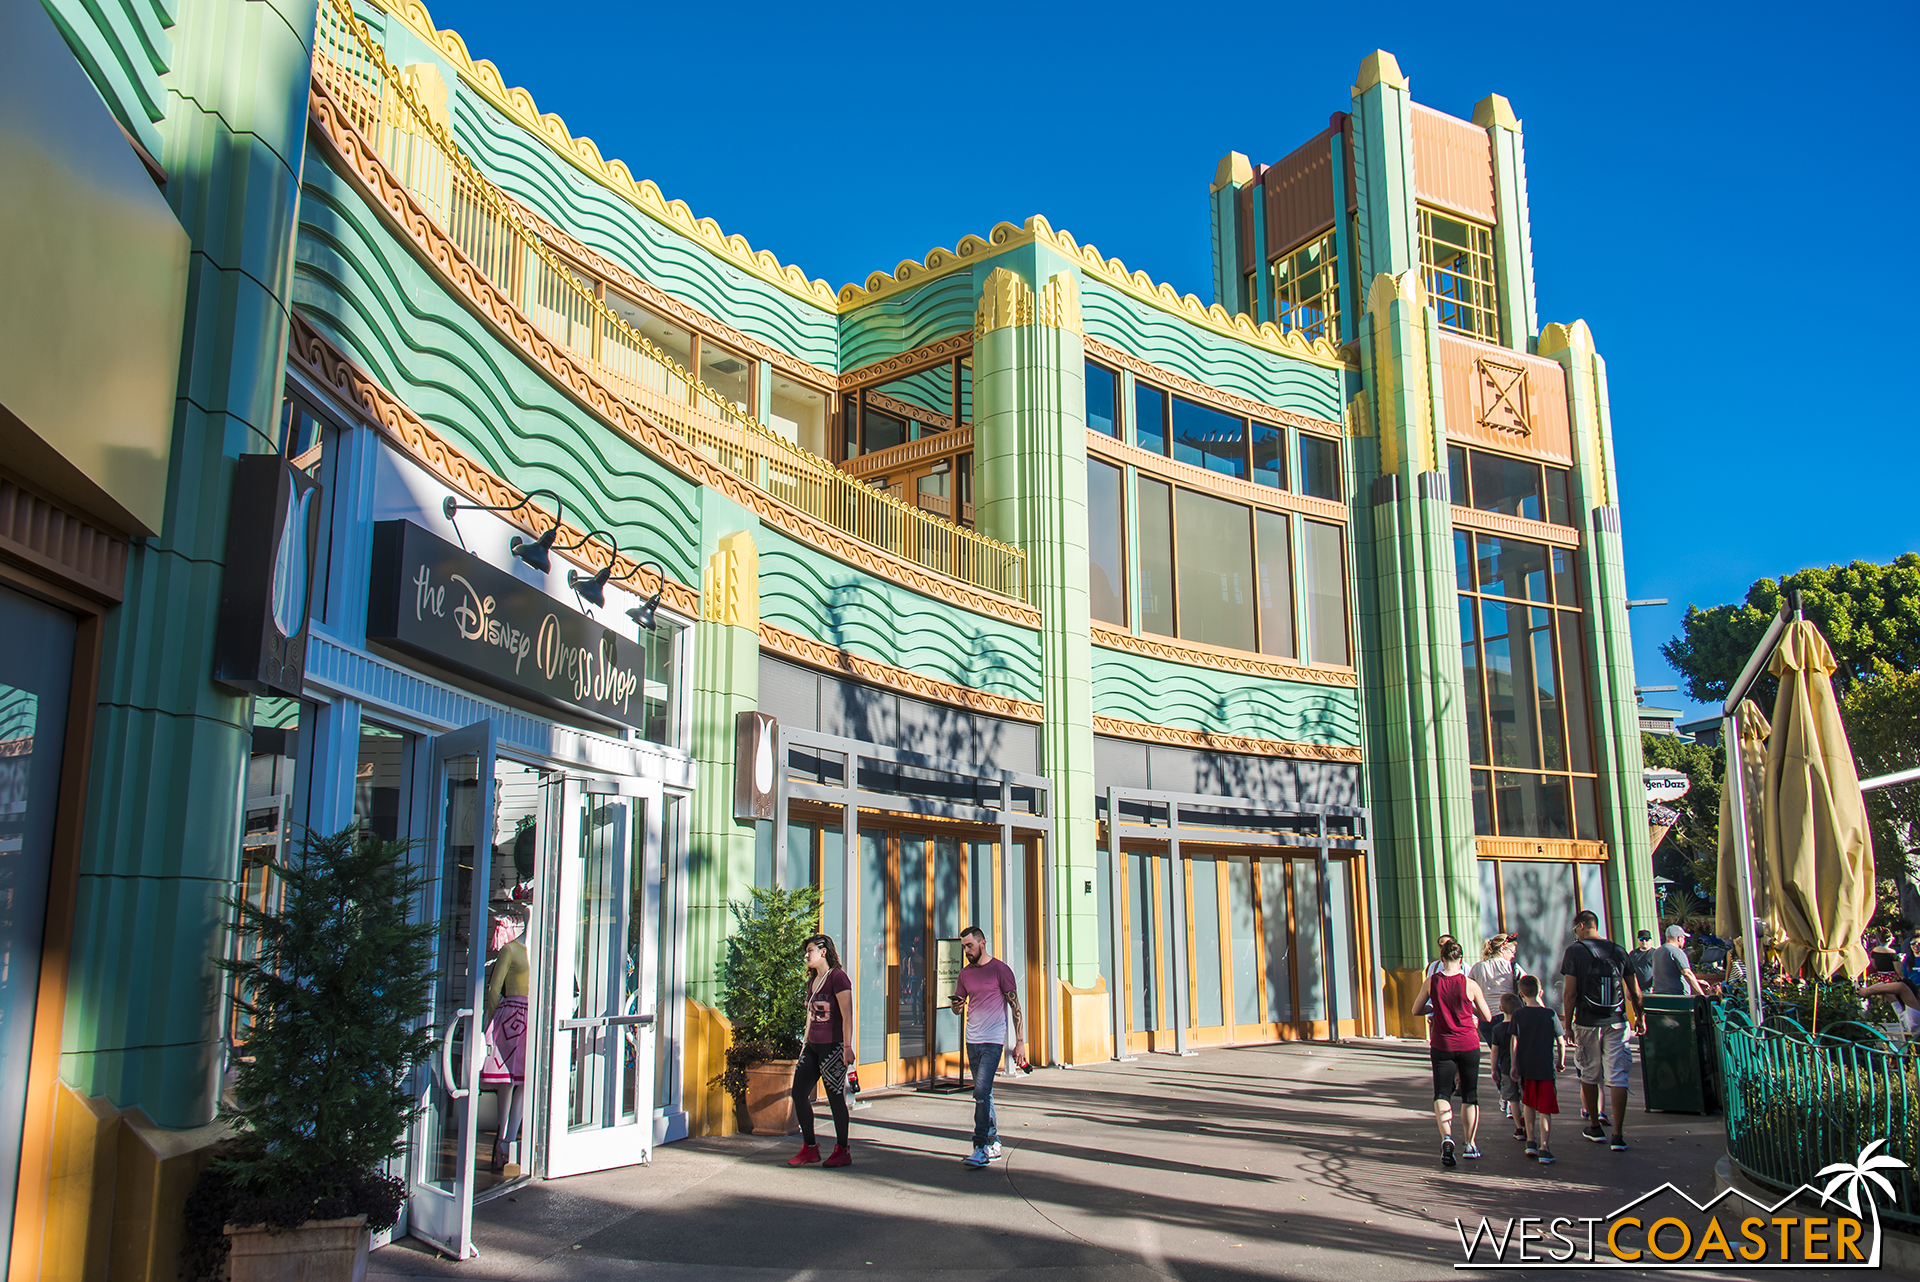  Based on the concept art, it appears this will include an outdoor second floor patio above The Disney Dress Shop. 